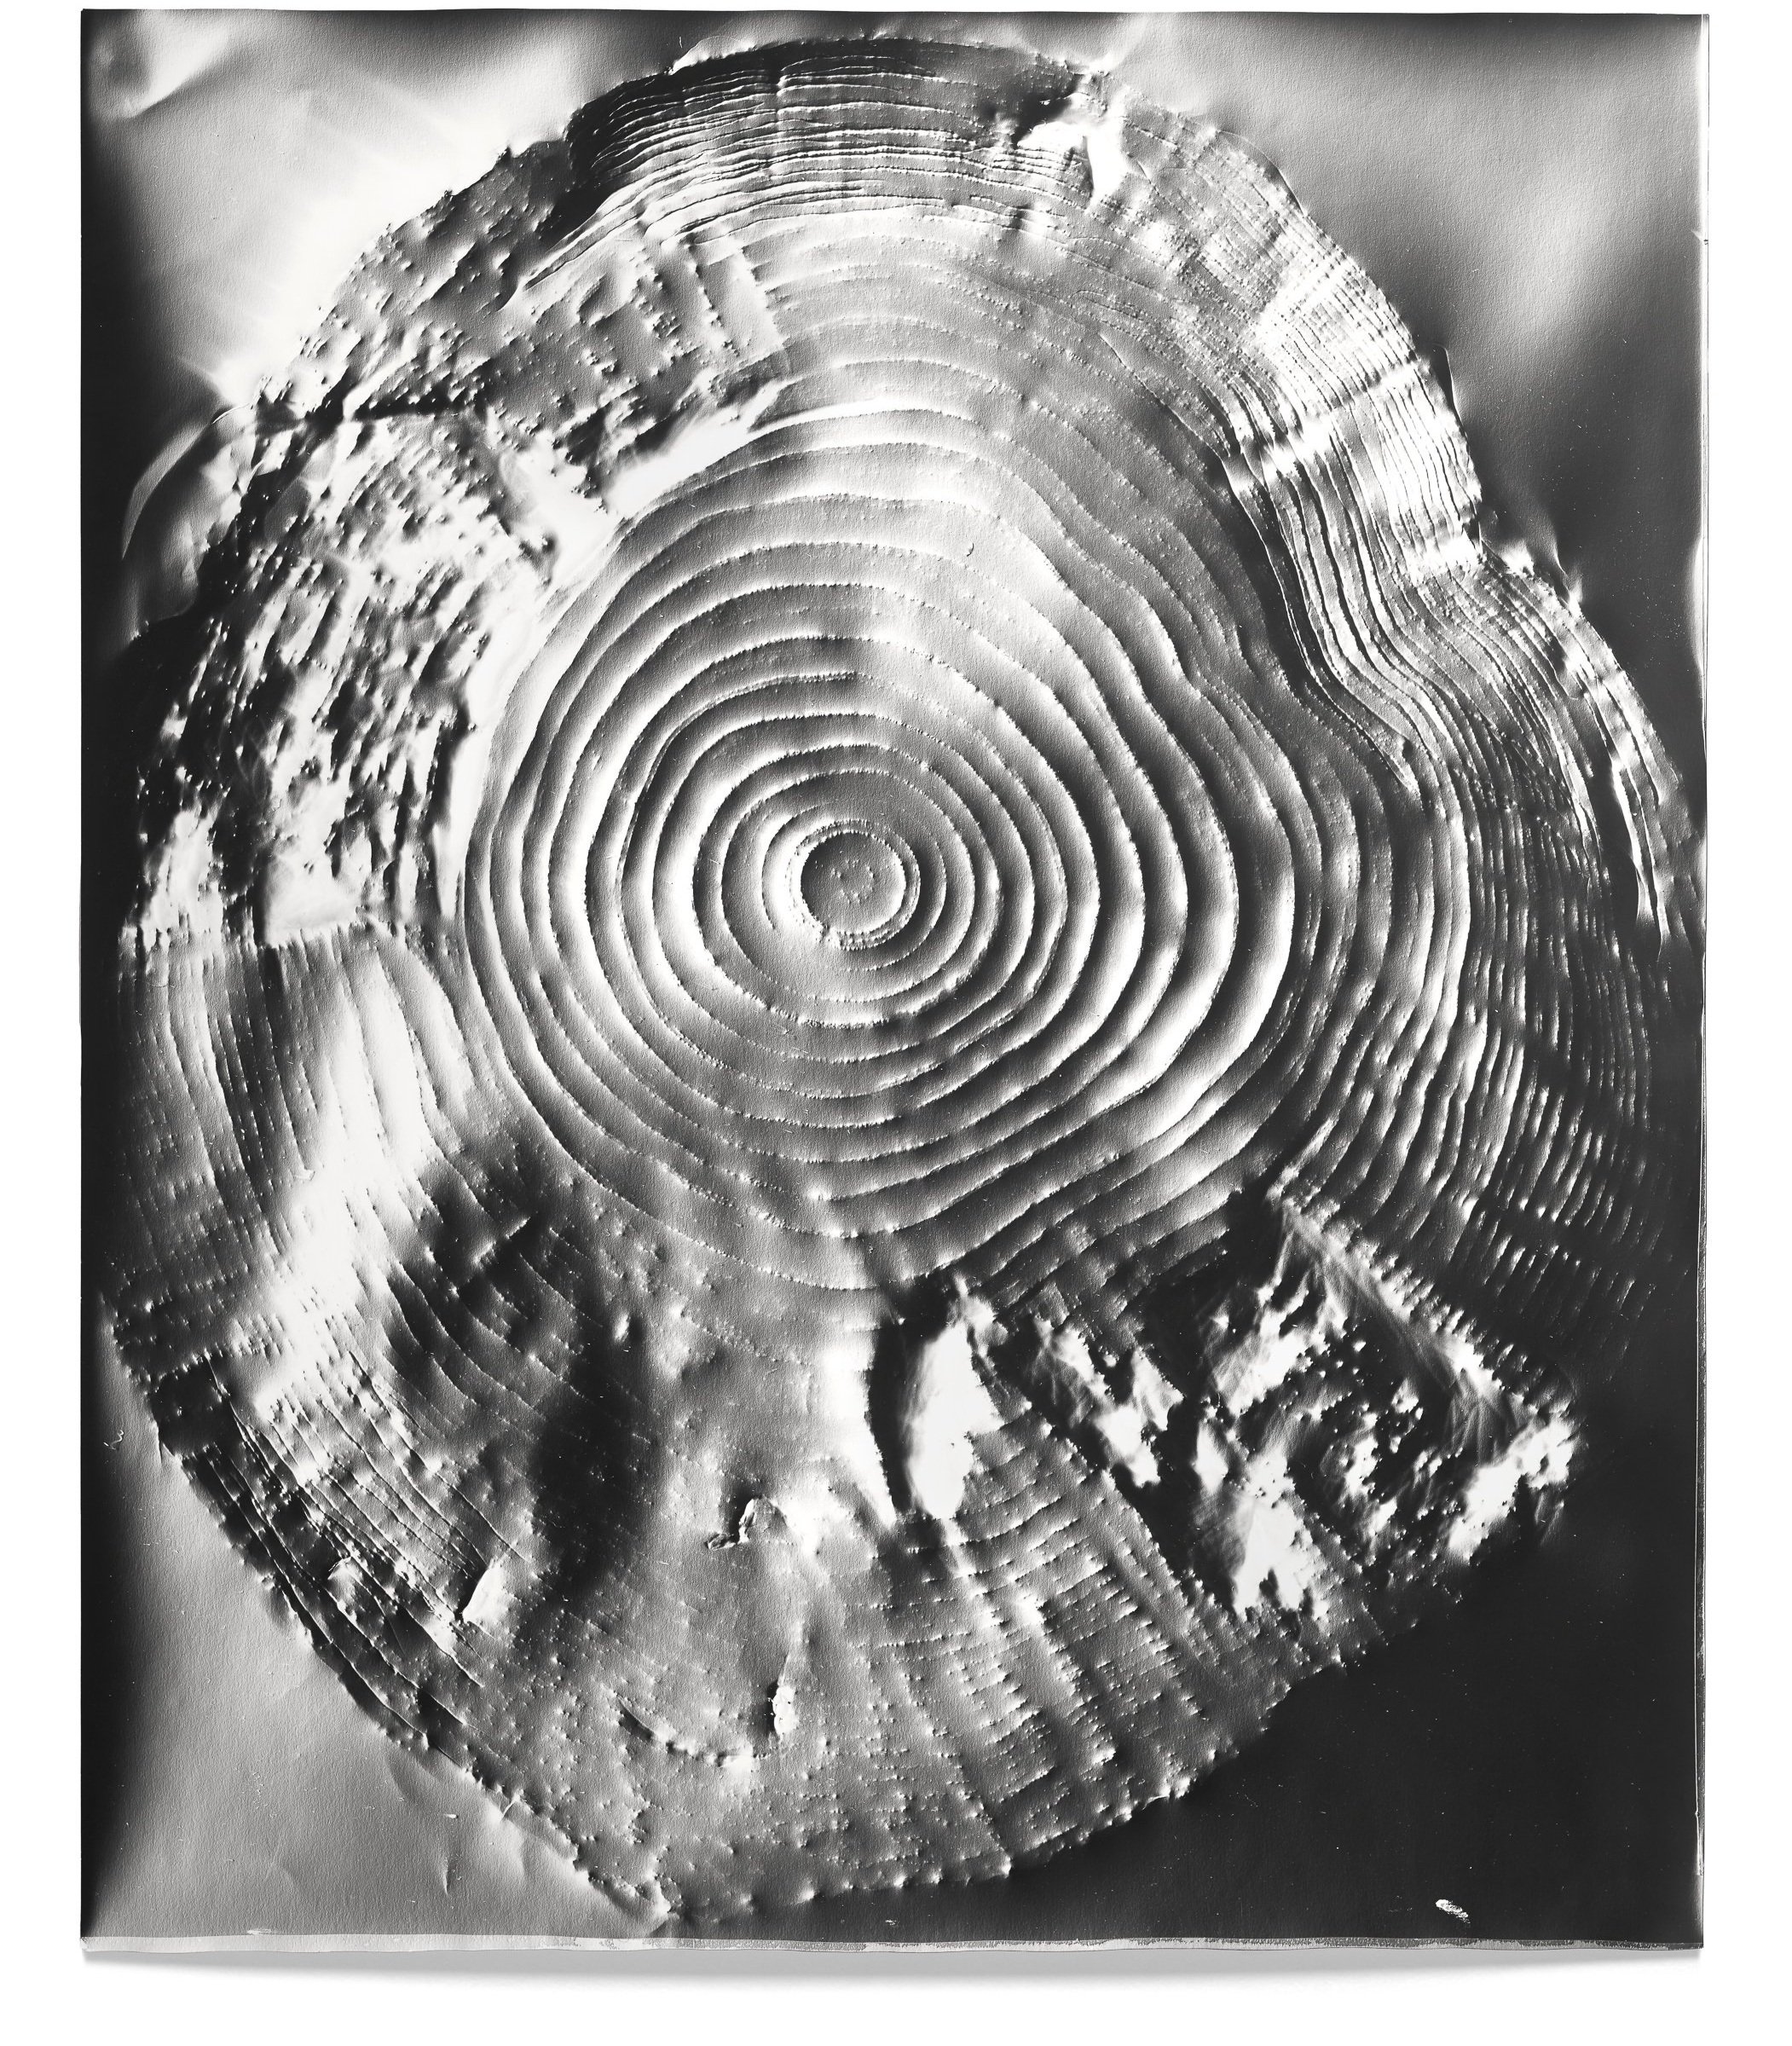   Automatic Earth 6,  2016 Photographic rubbing (embossed silver gelatin photogram) 24 x 20 in 